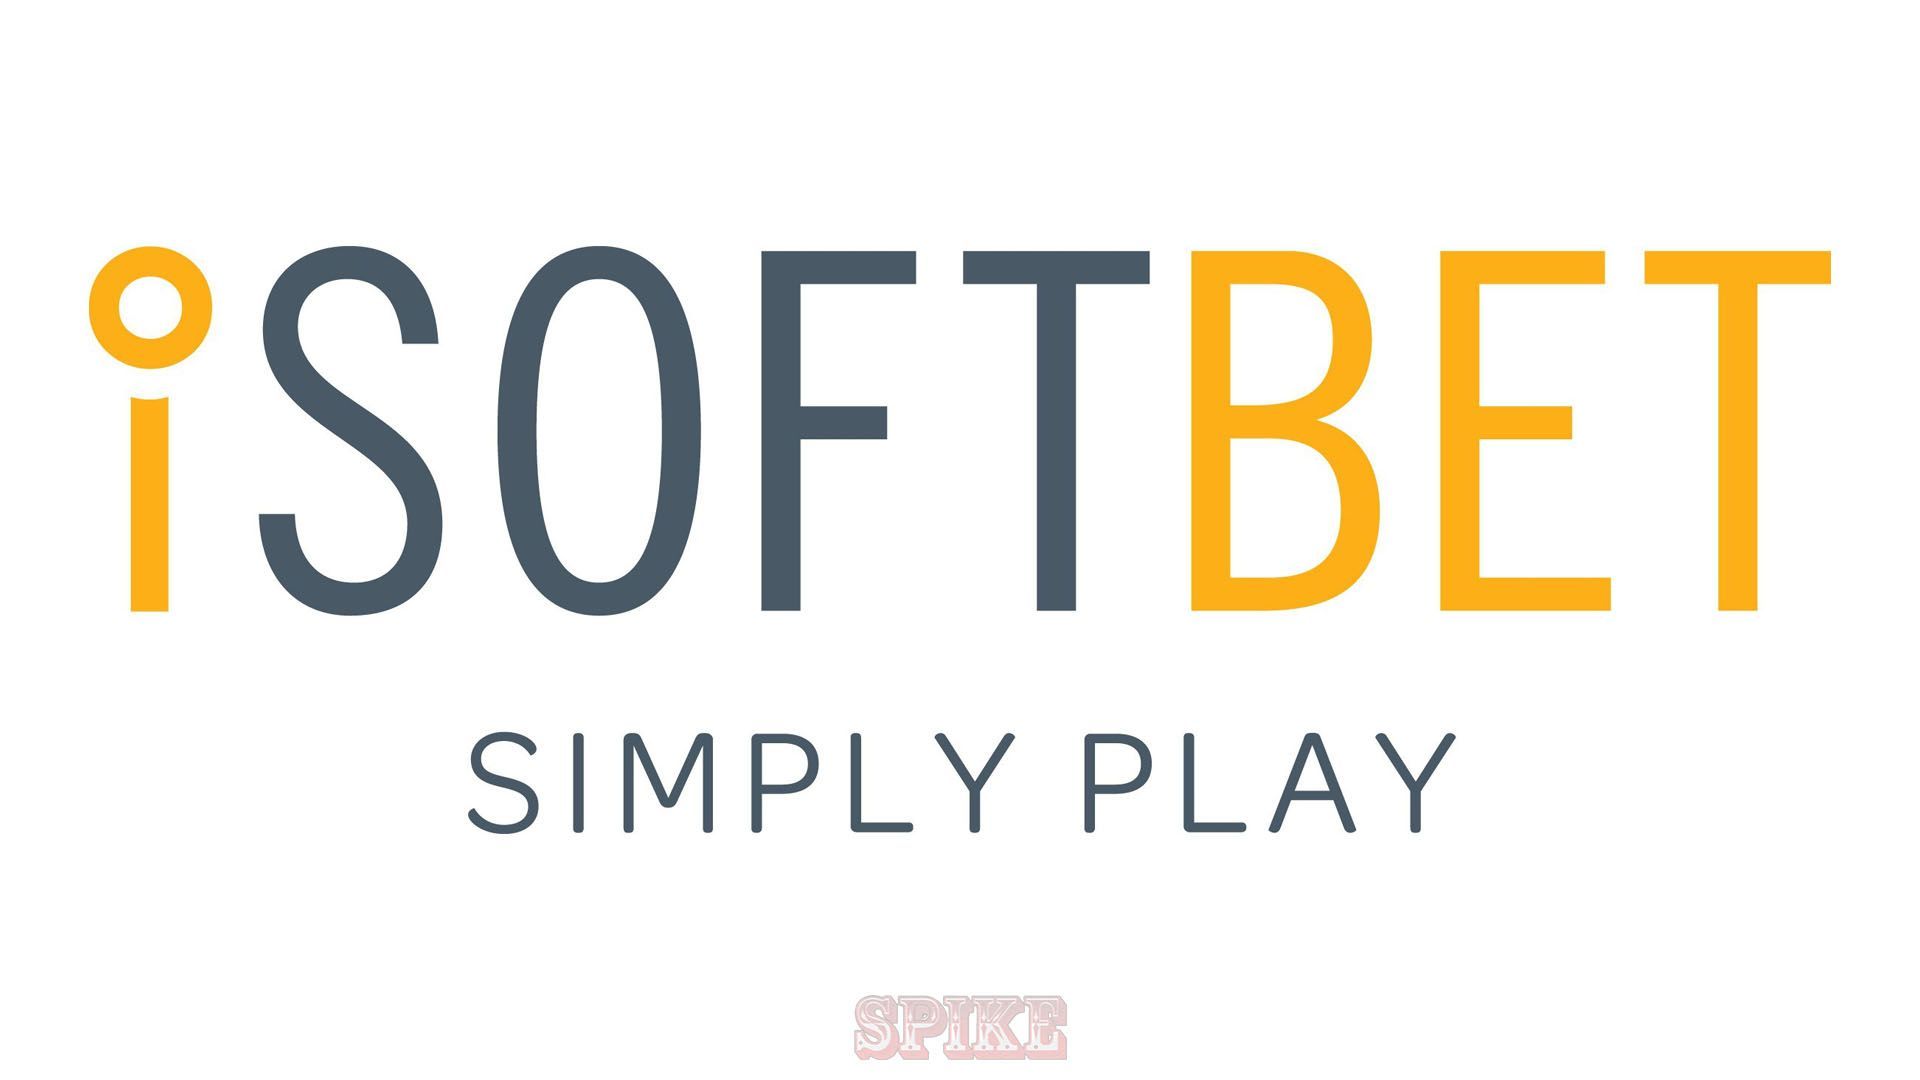 isoftbet producer free online games